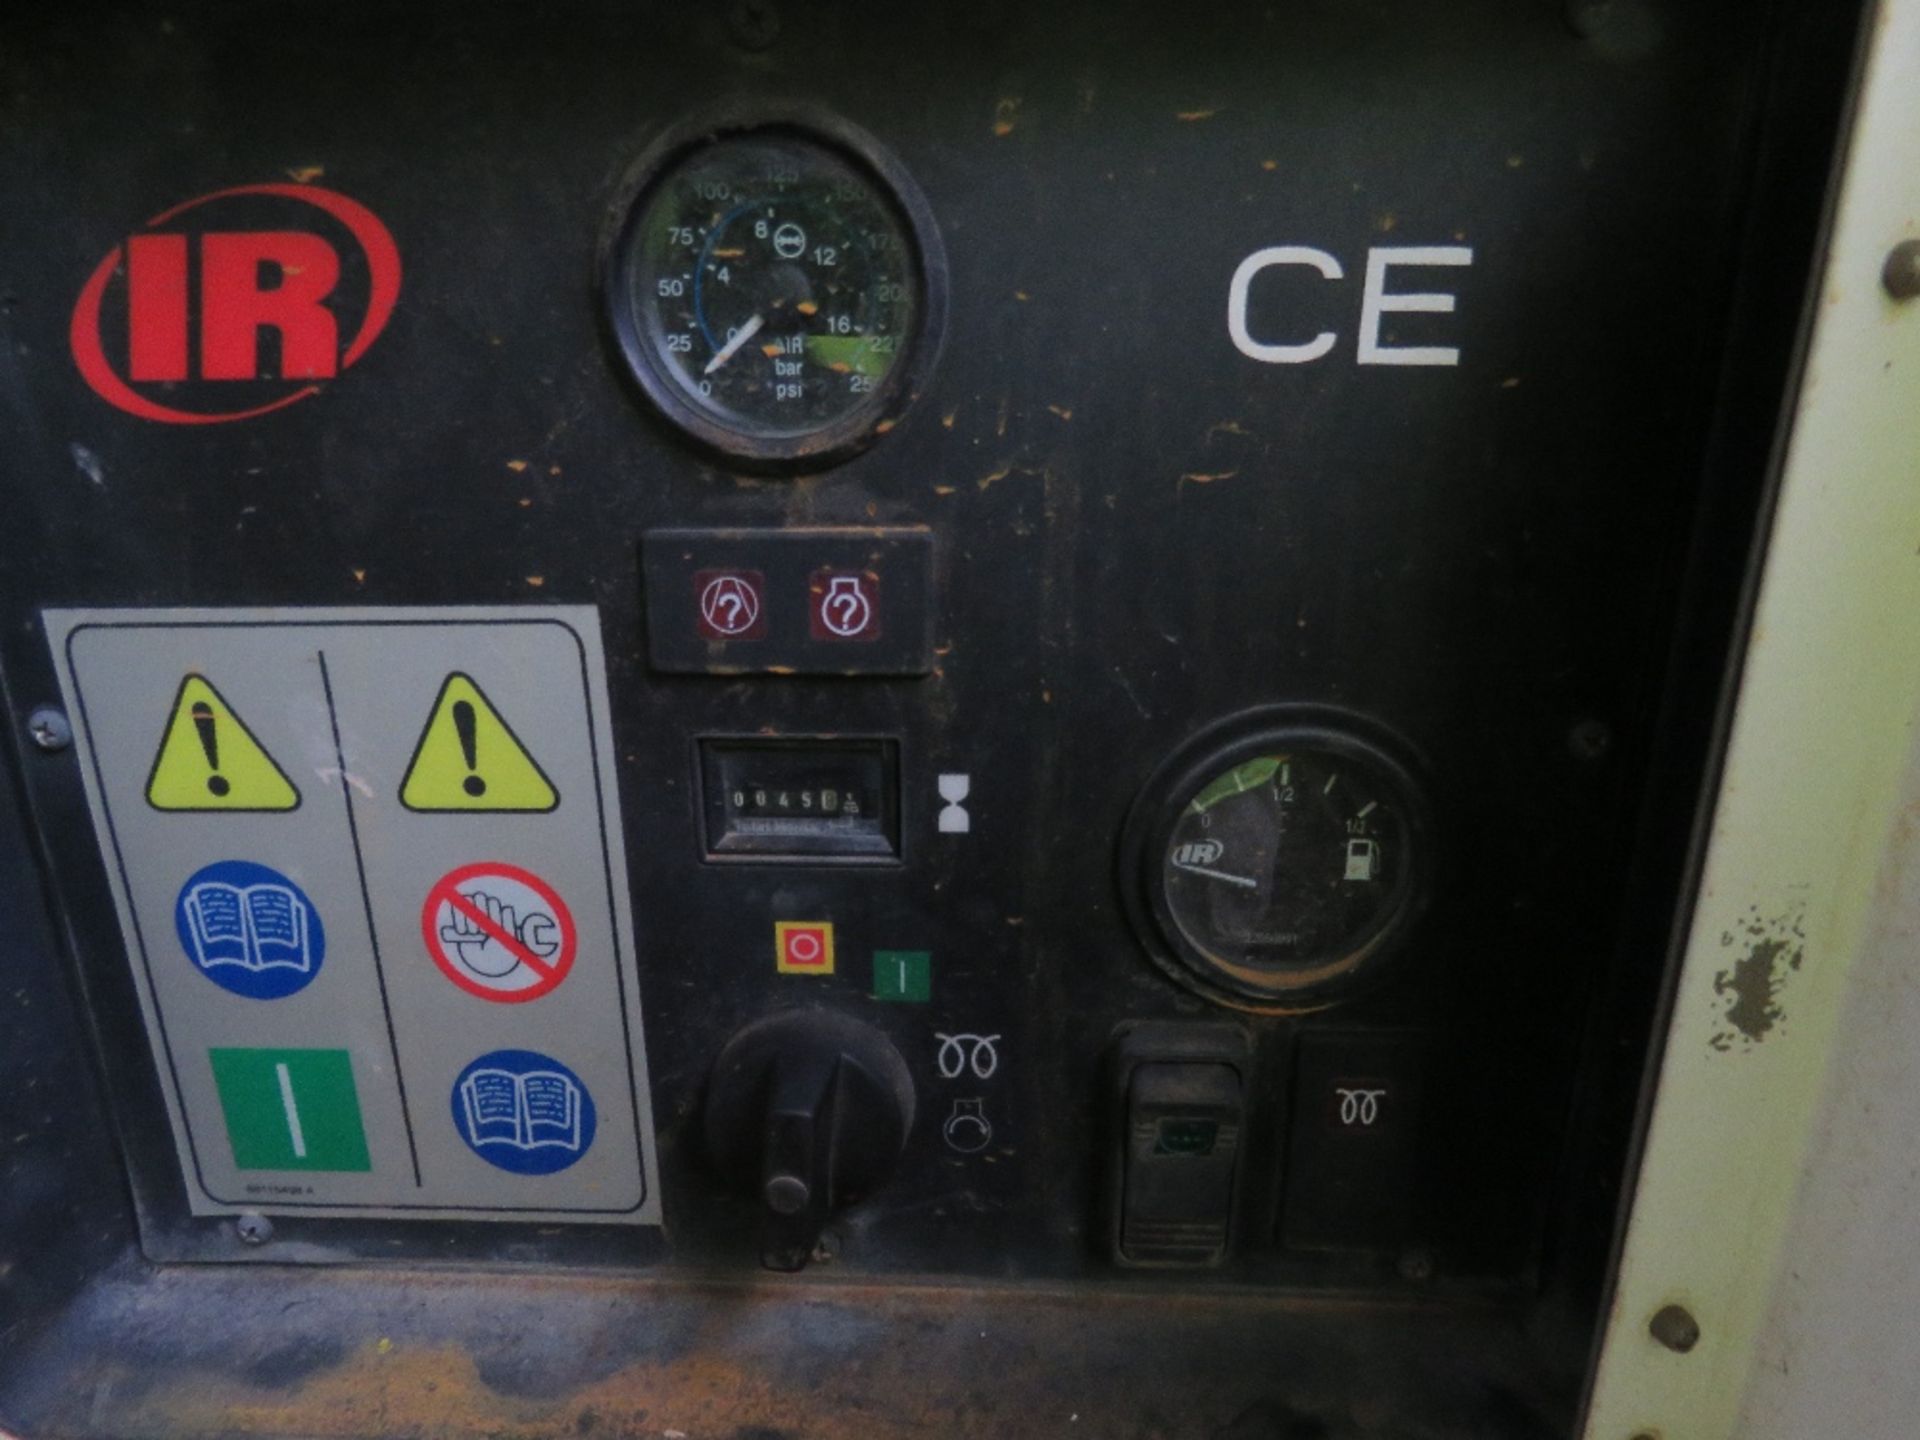 INGERSOLL RAND 8.6 BAR RATED COMPRESSOR. JOHN DEERE ENGINE. YEAR 2004. MODEL: R1300F7170. DIRECT FRO - Image 2 of 6